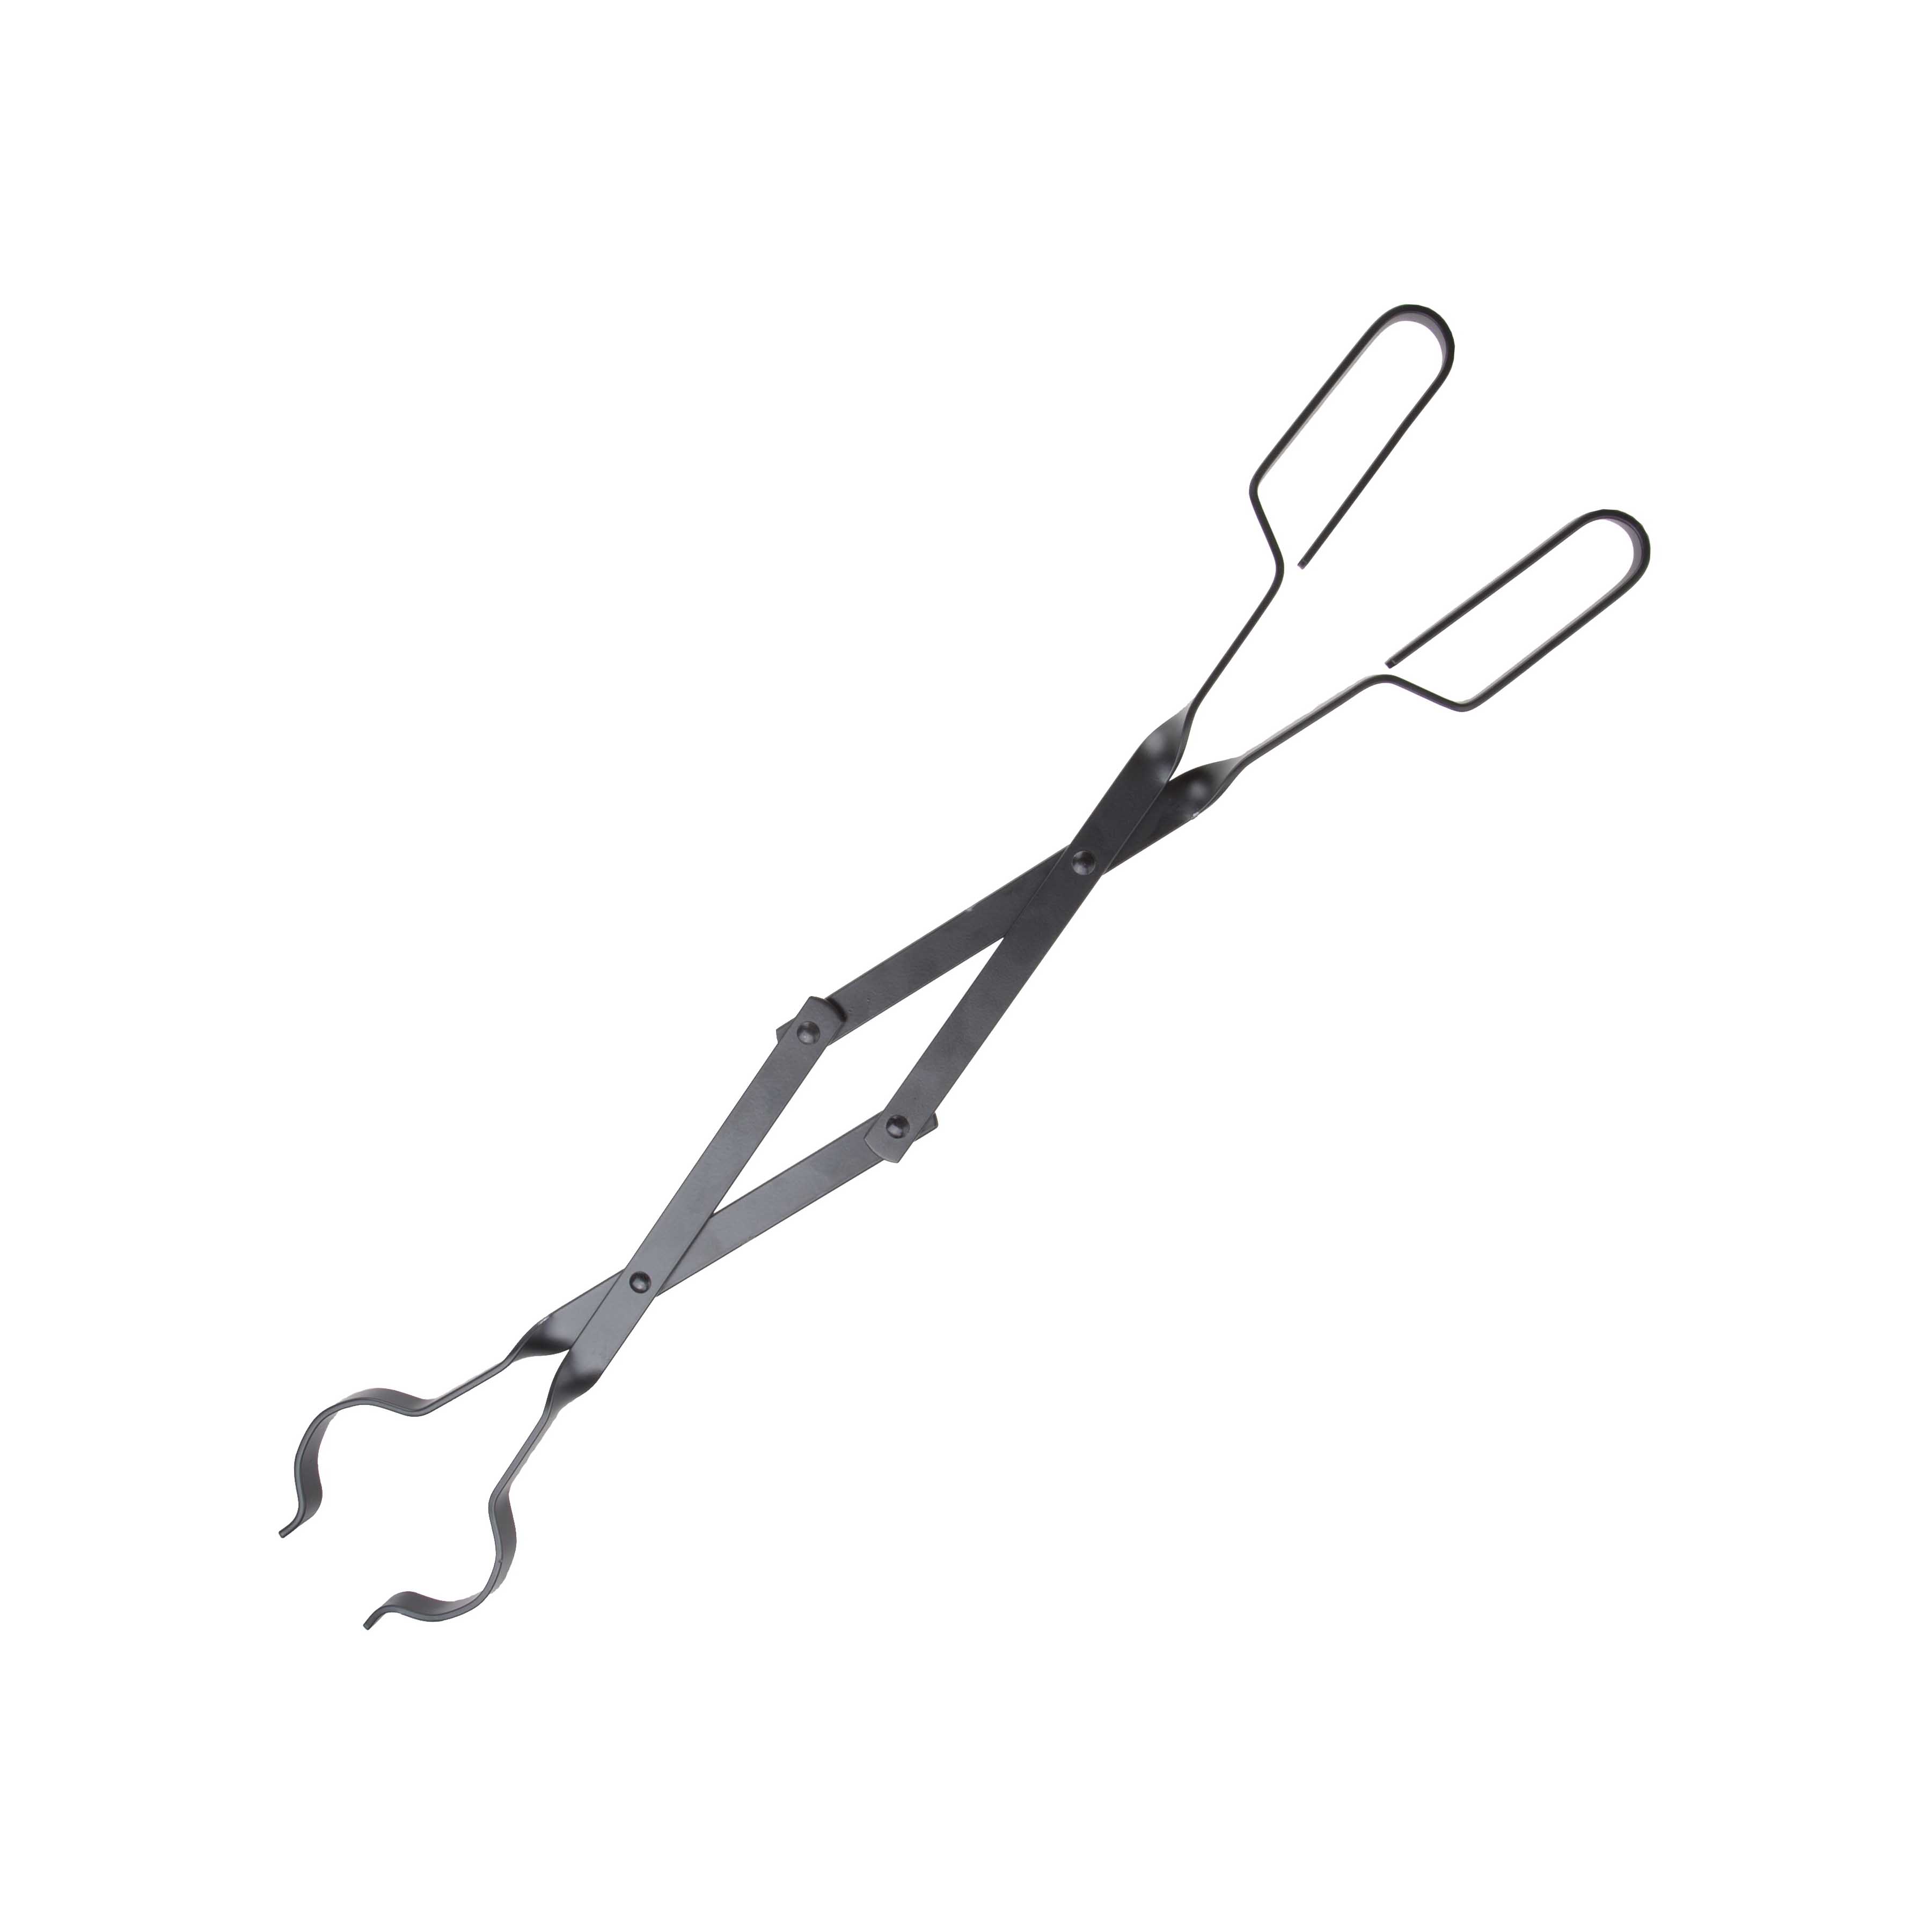 A701BK-C Fireplace Tongs, 26 in L